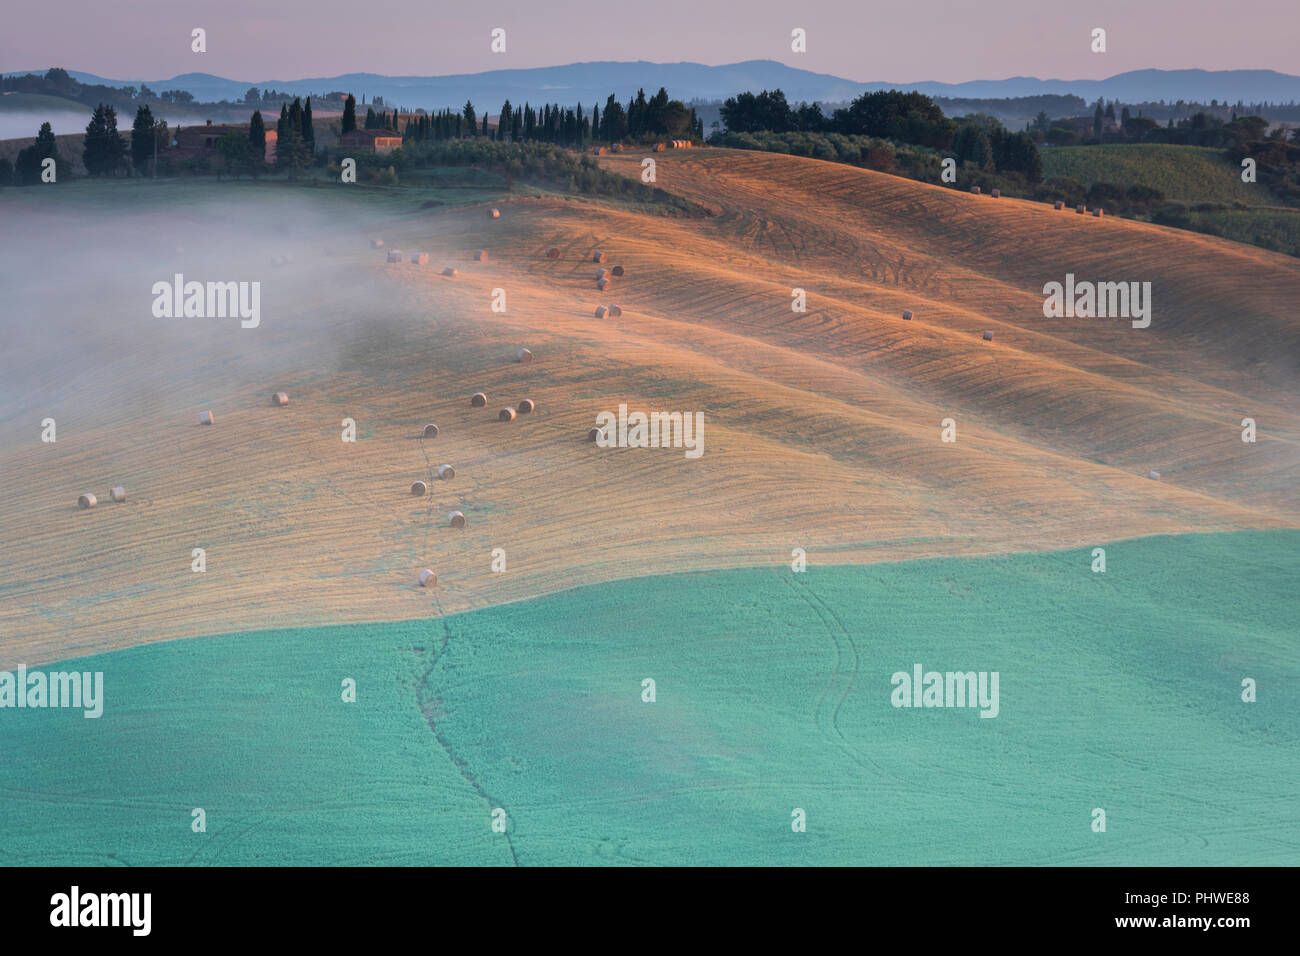 A view of farmlands and rolling hills near Buonconvento, Tuscany, Italy. Stock Photo